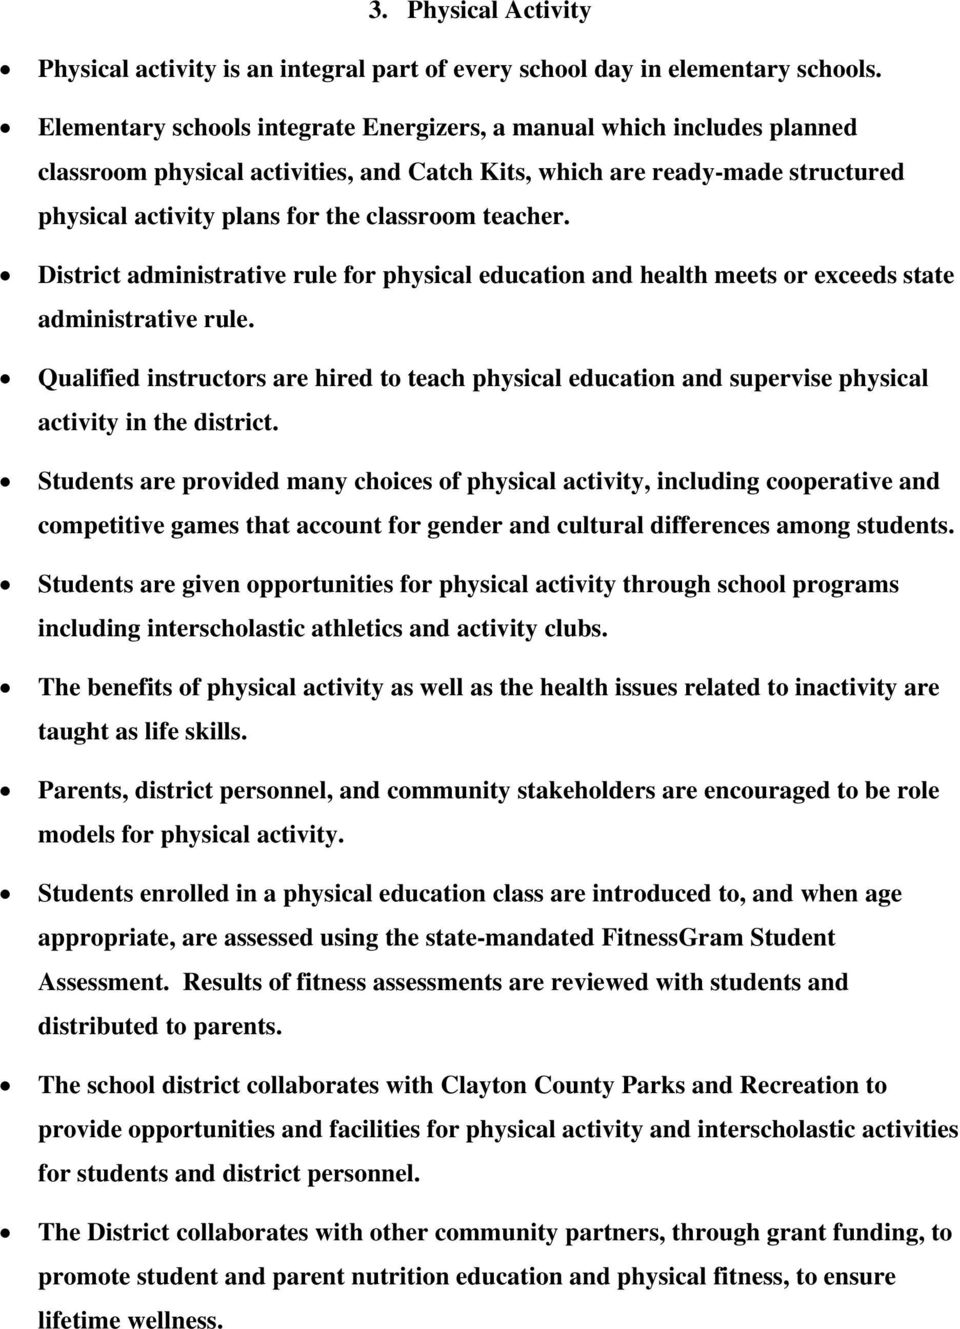 teacher. District administrative rule for physical education and health meets or exceeds state administrative rule.